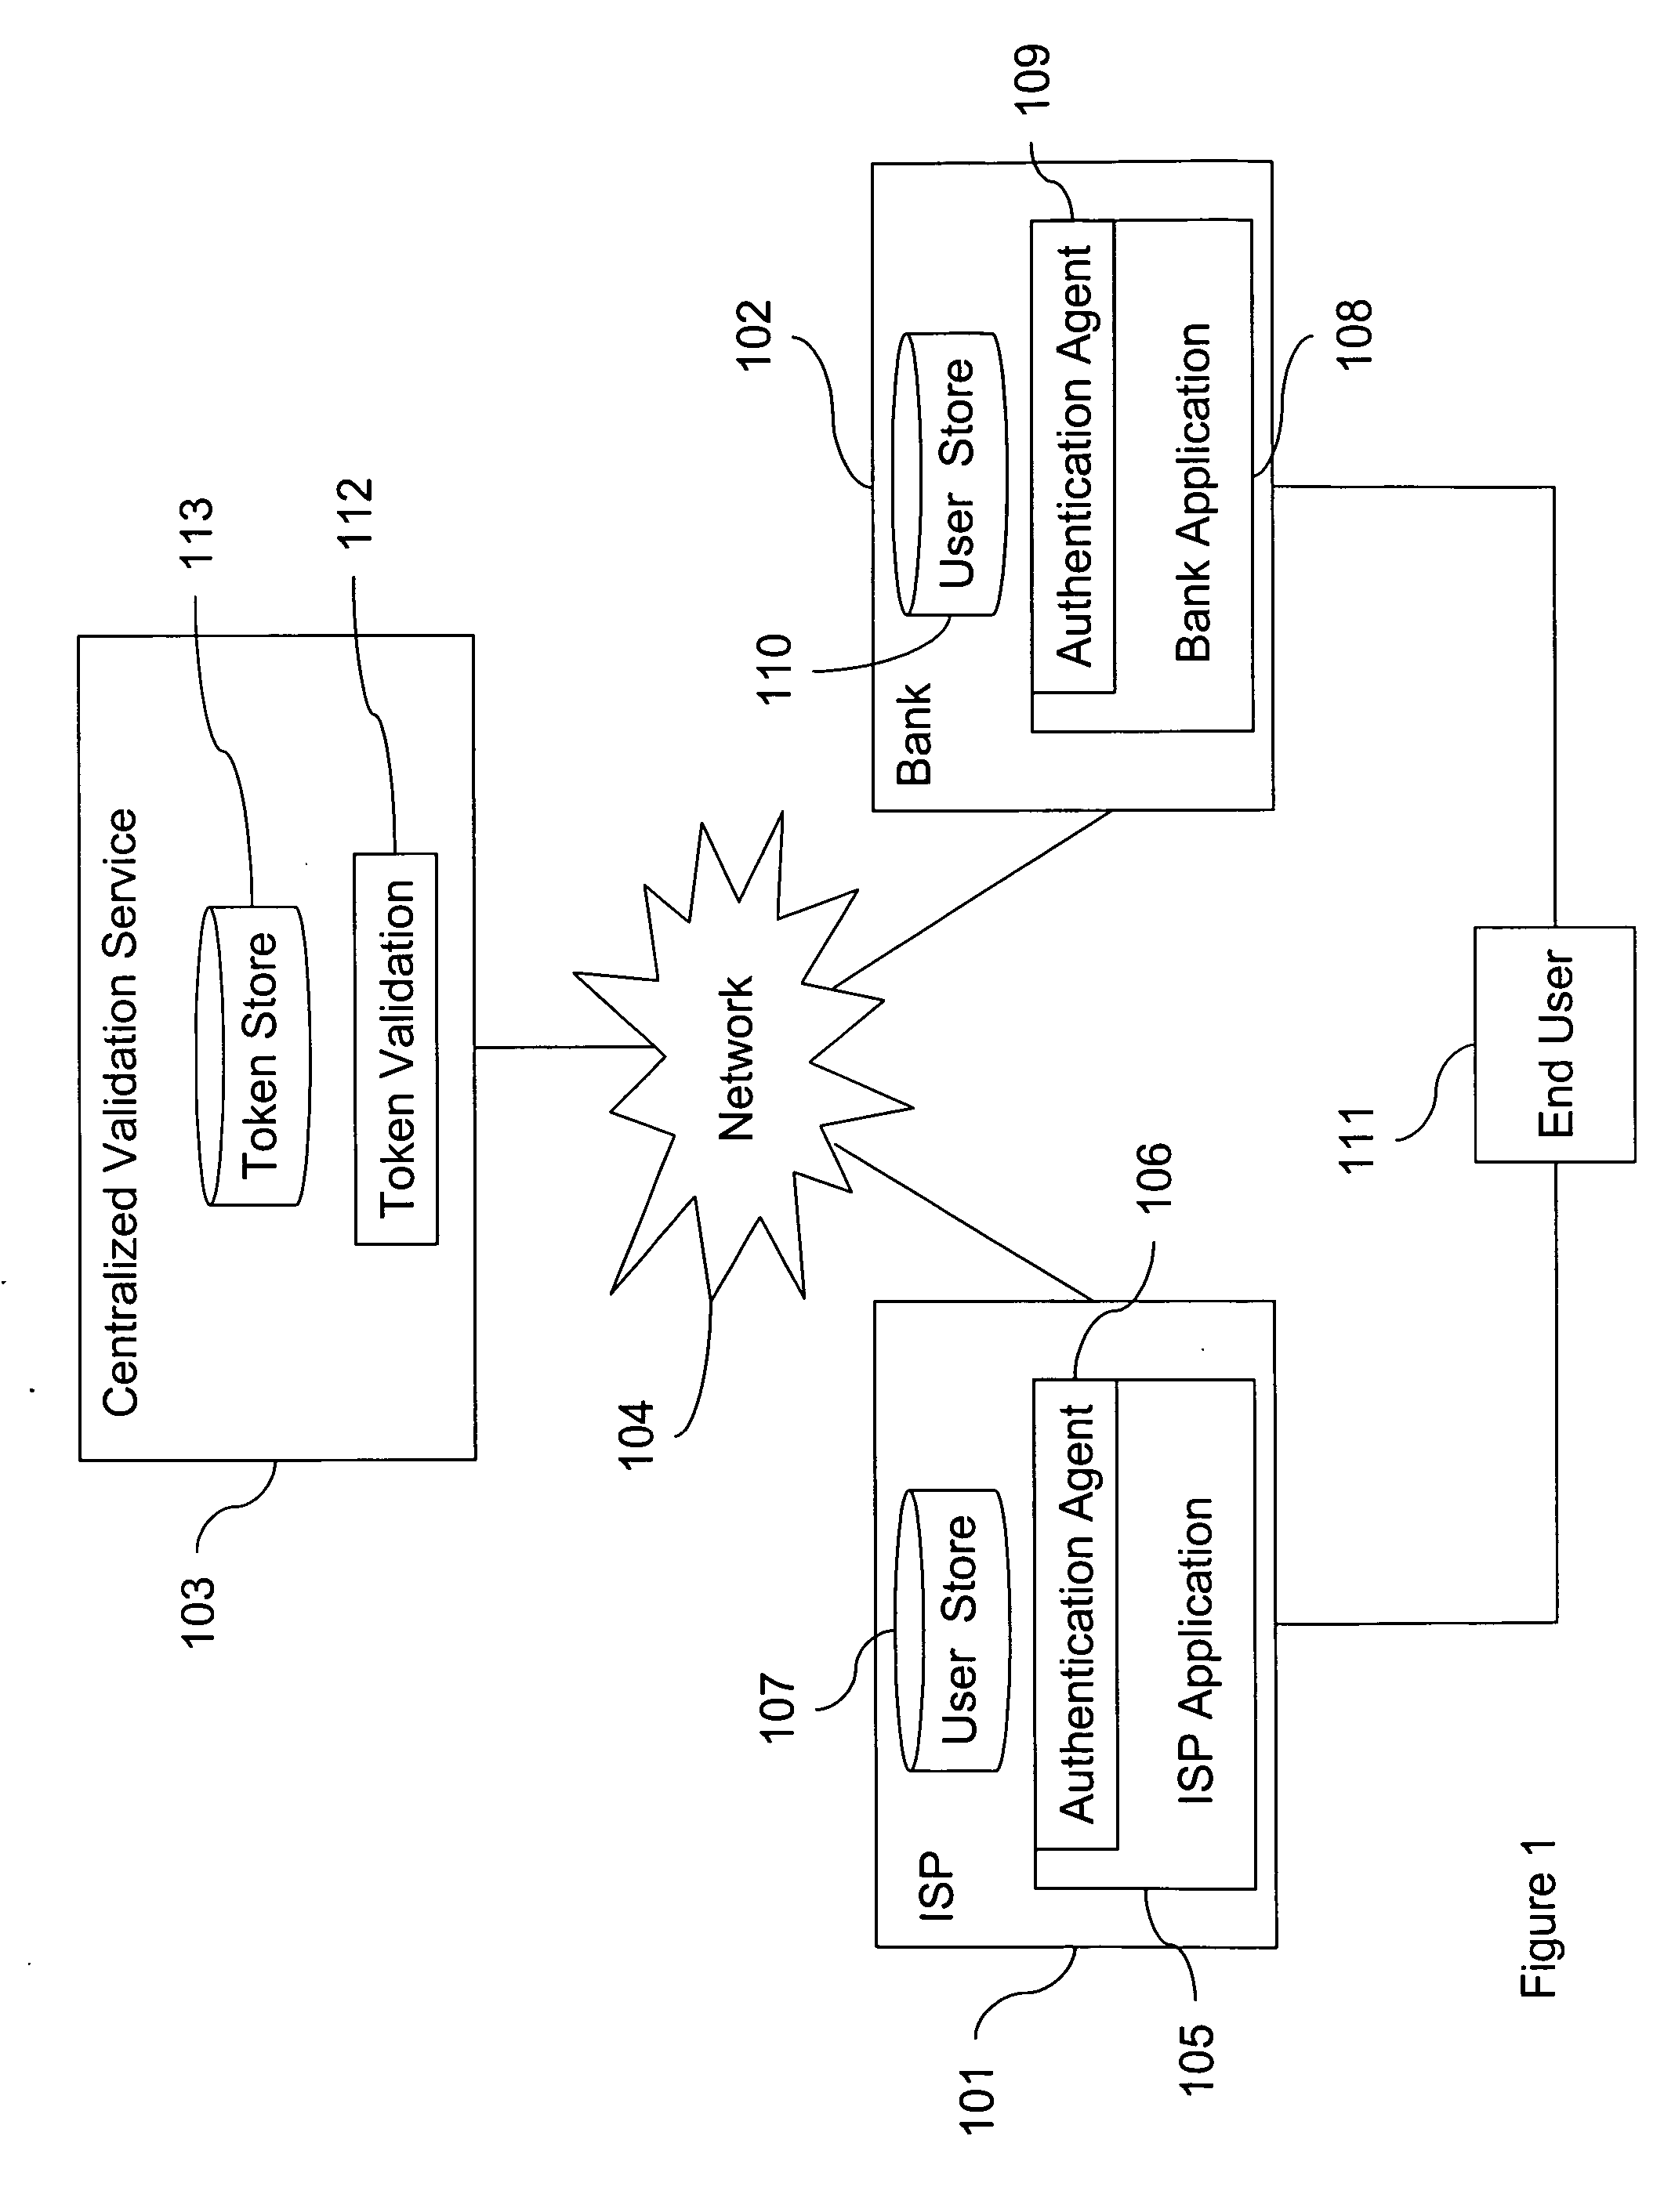 Token sharing system and method